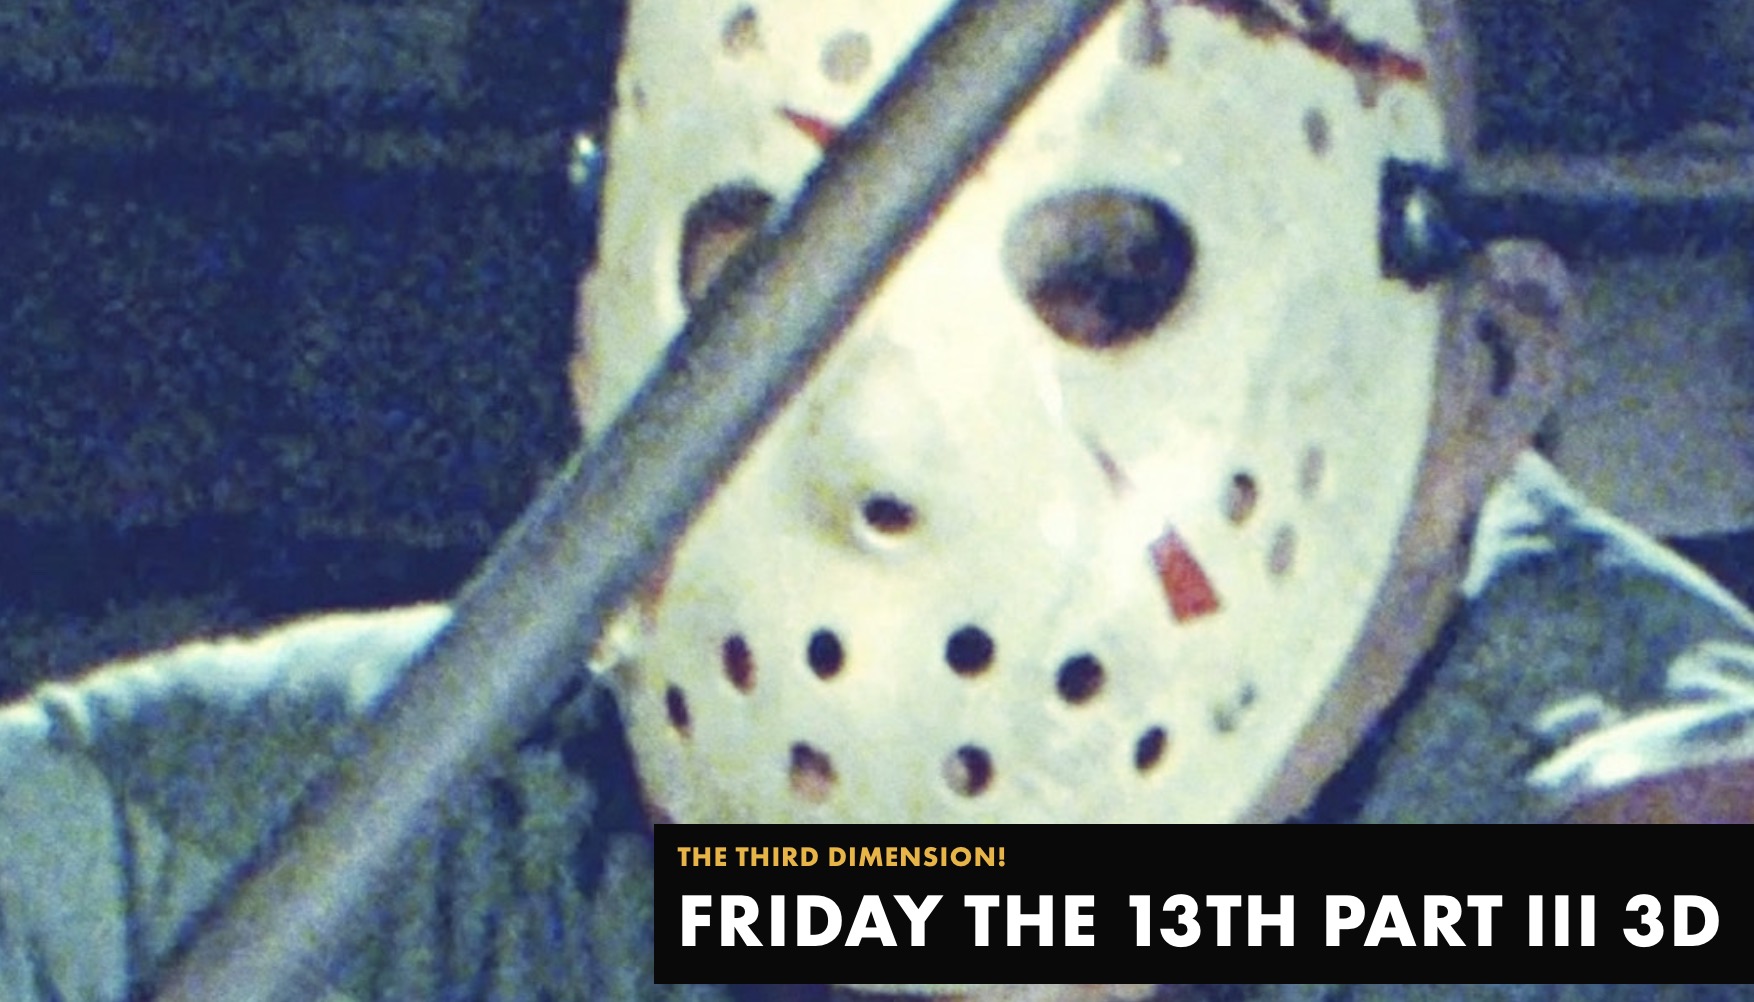 Friday the 13th III 3D